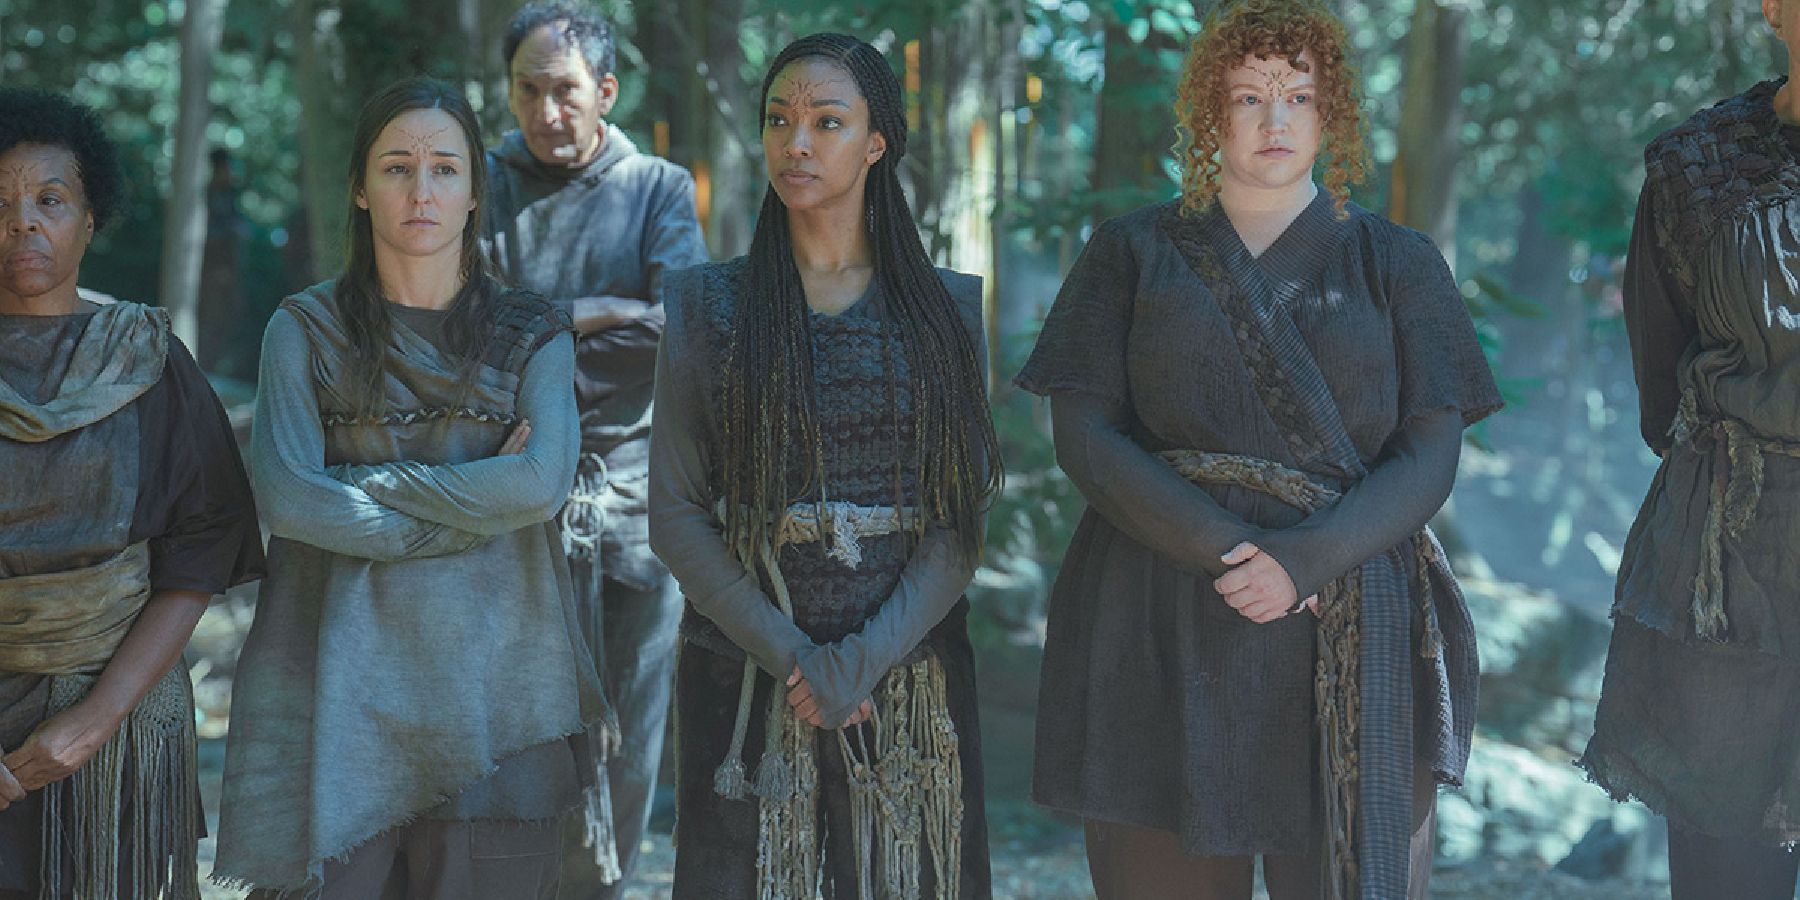 Sonequa Martin-Green as Burnham and Mary Wiseman as Tilly, in disguise as locals